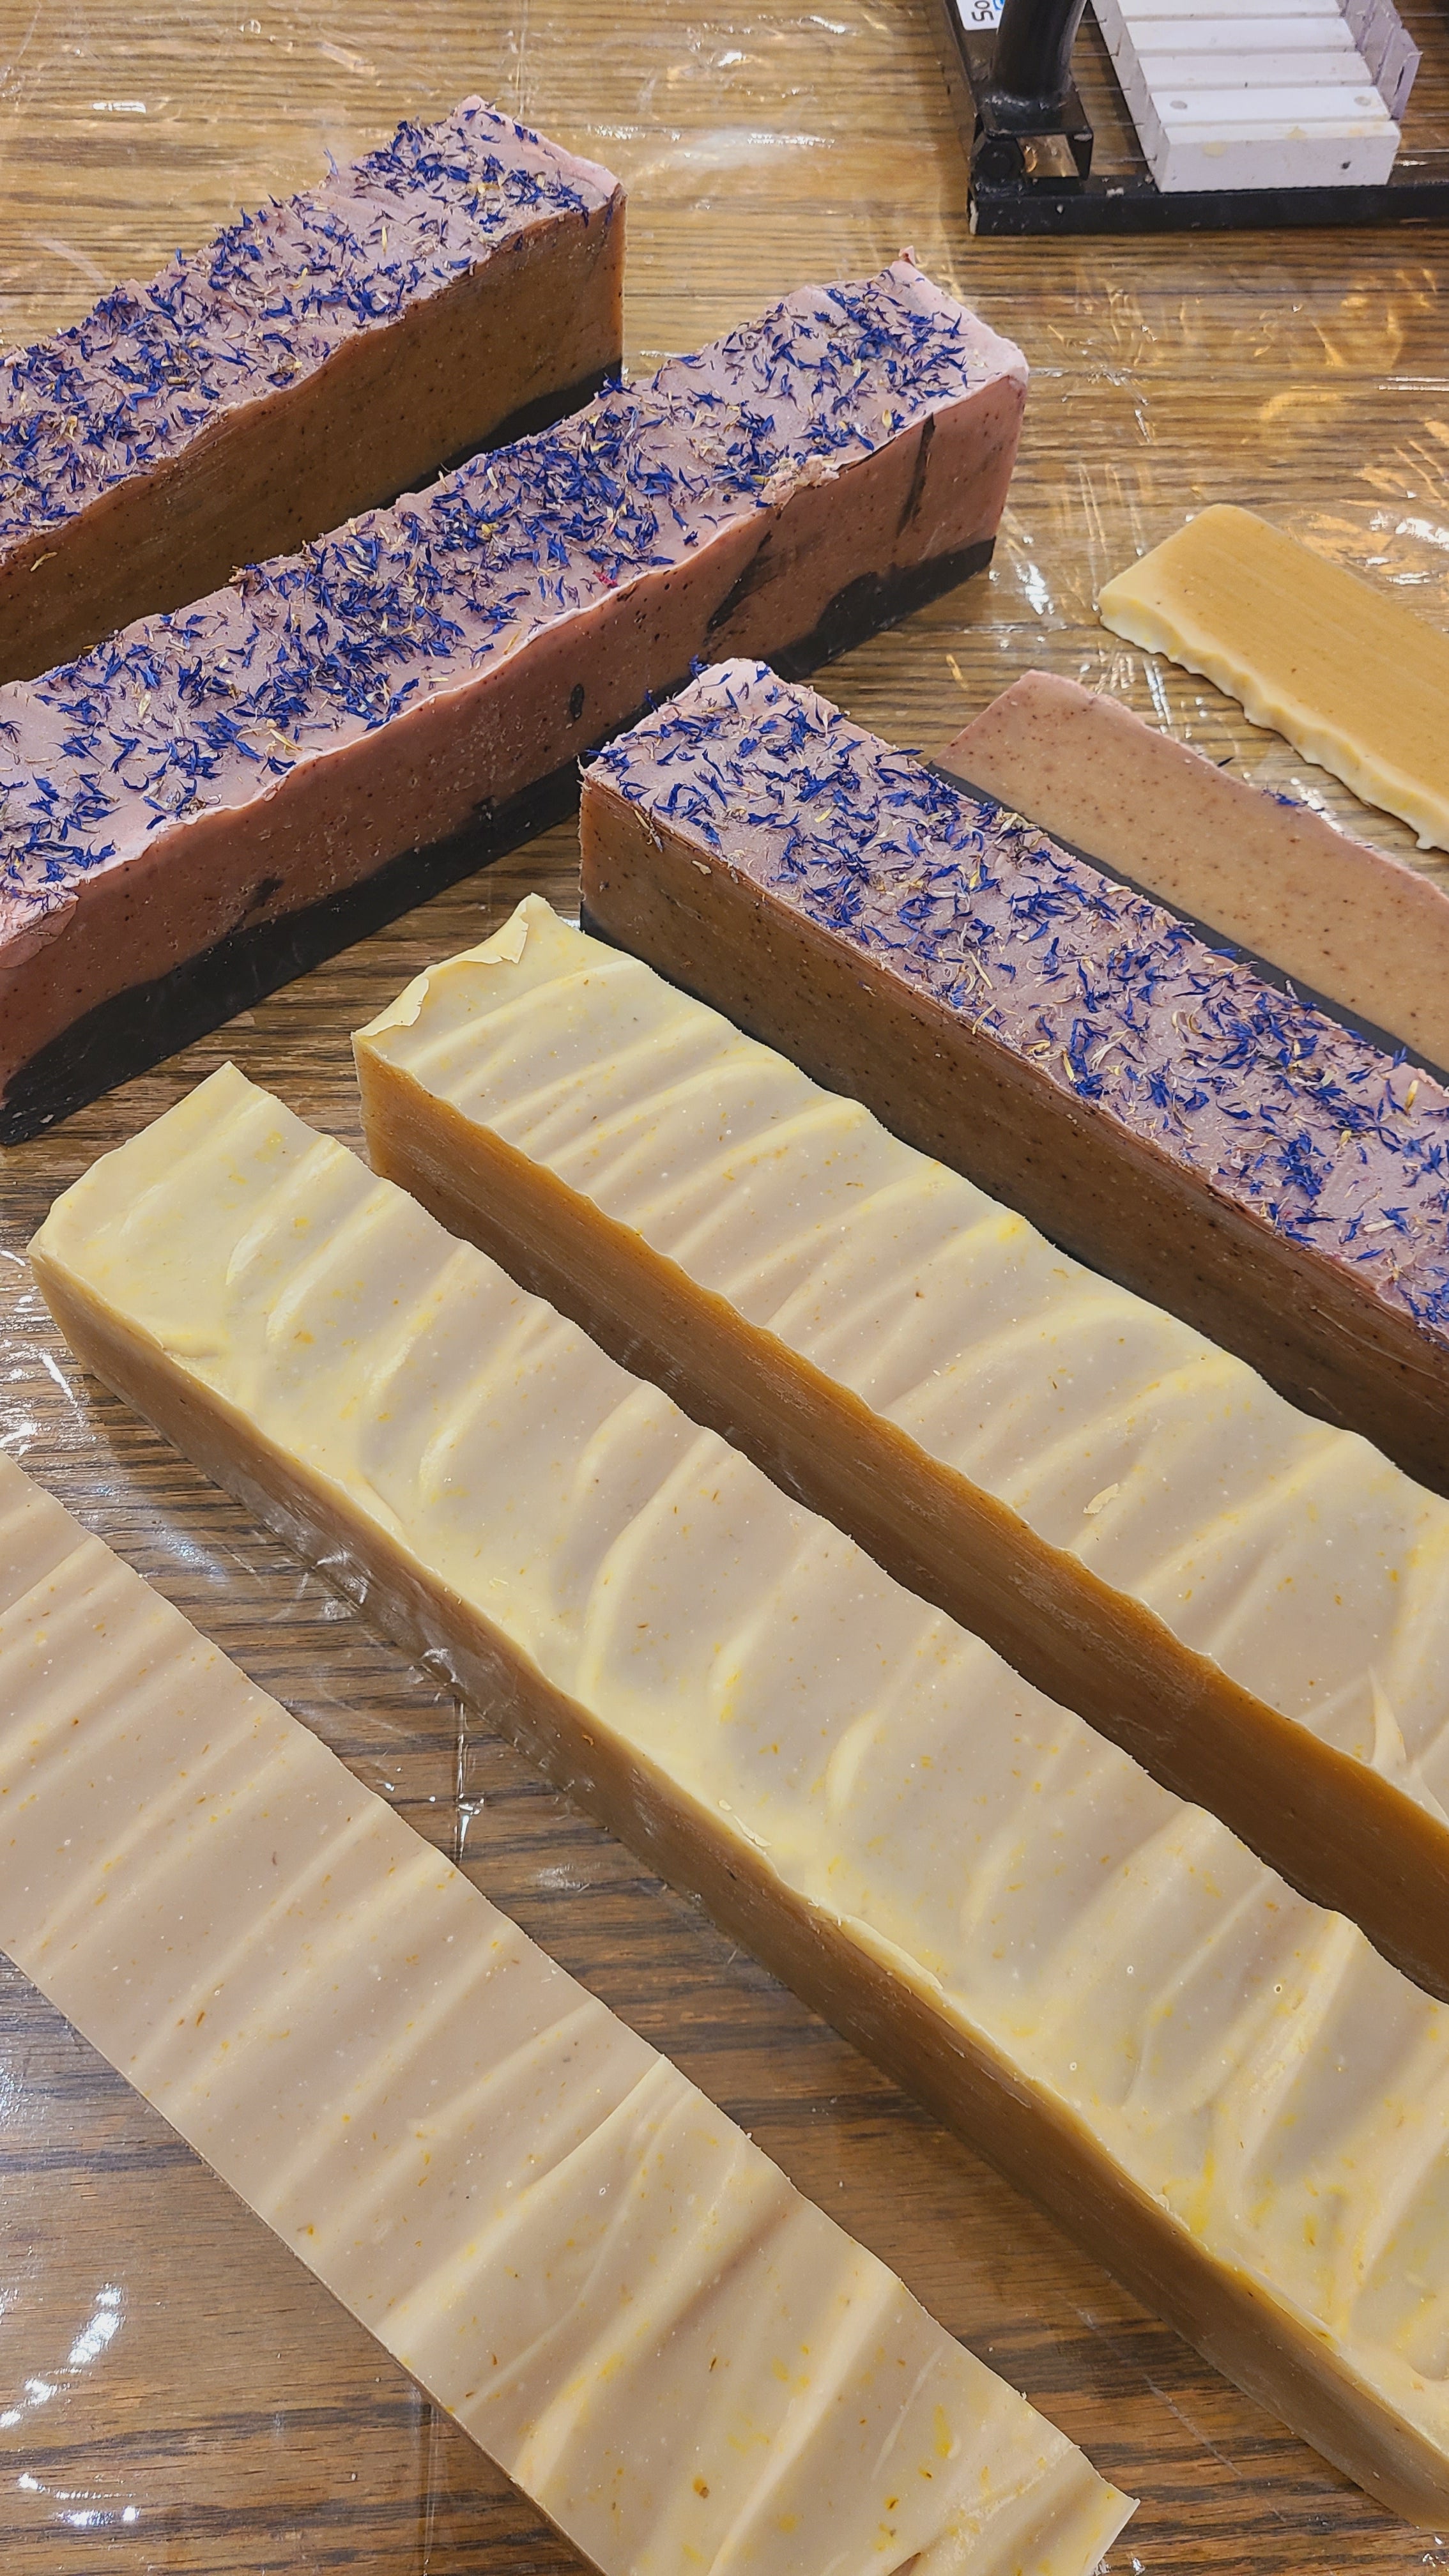 Soap making class (our next one is Oct 6)